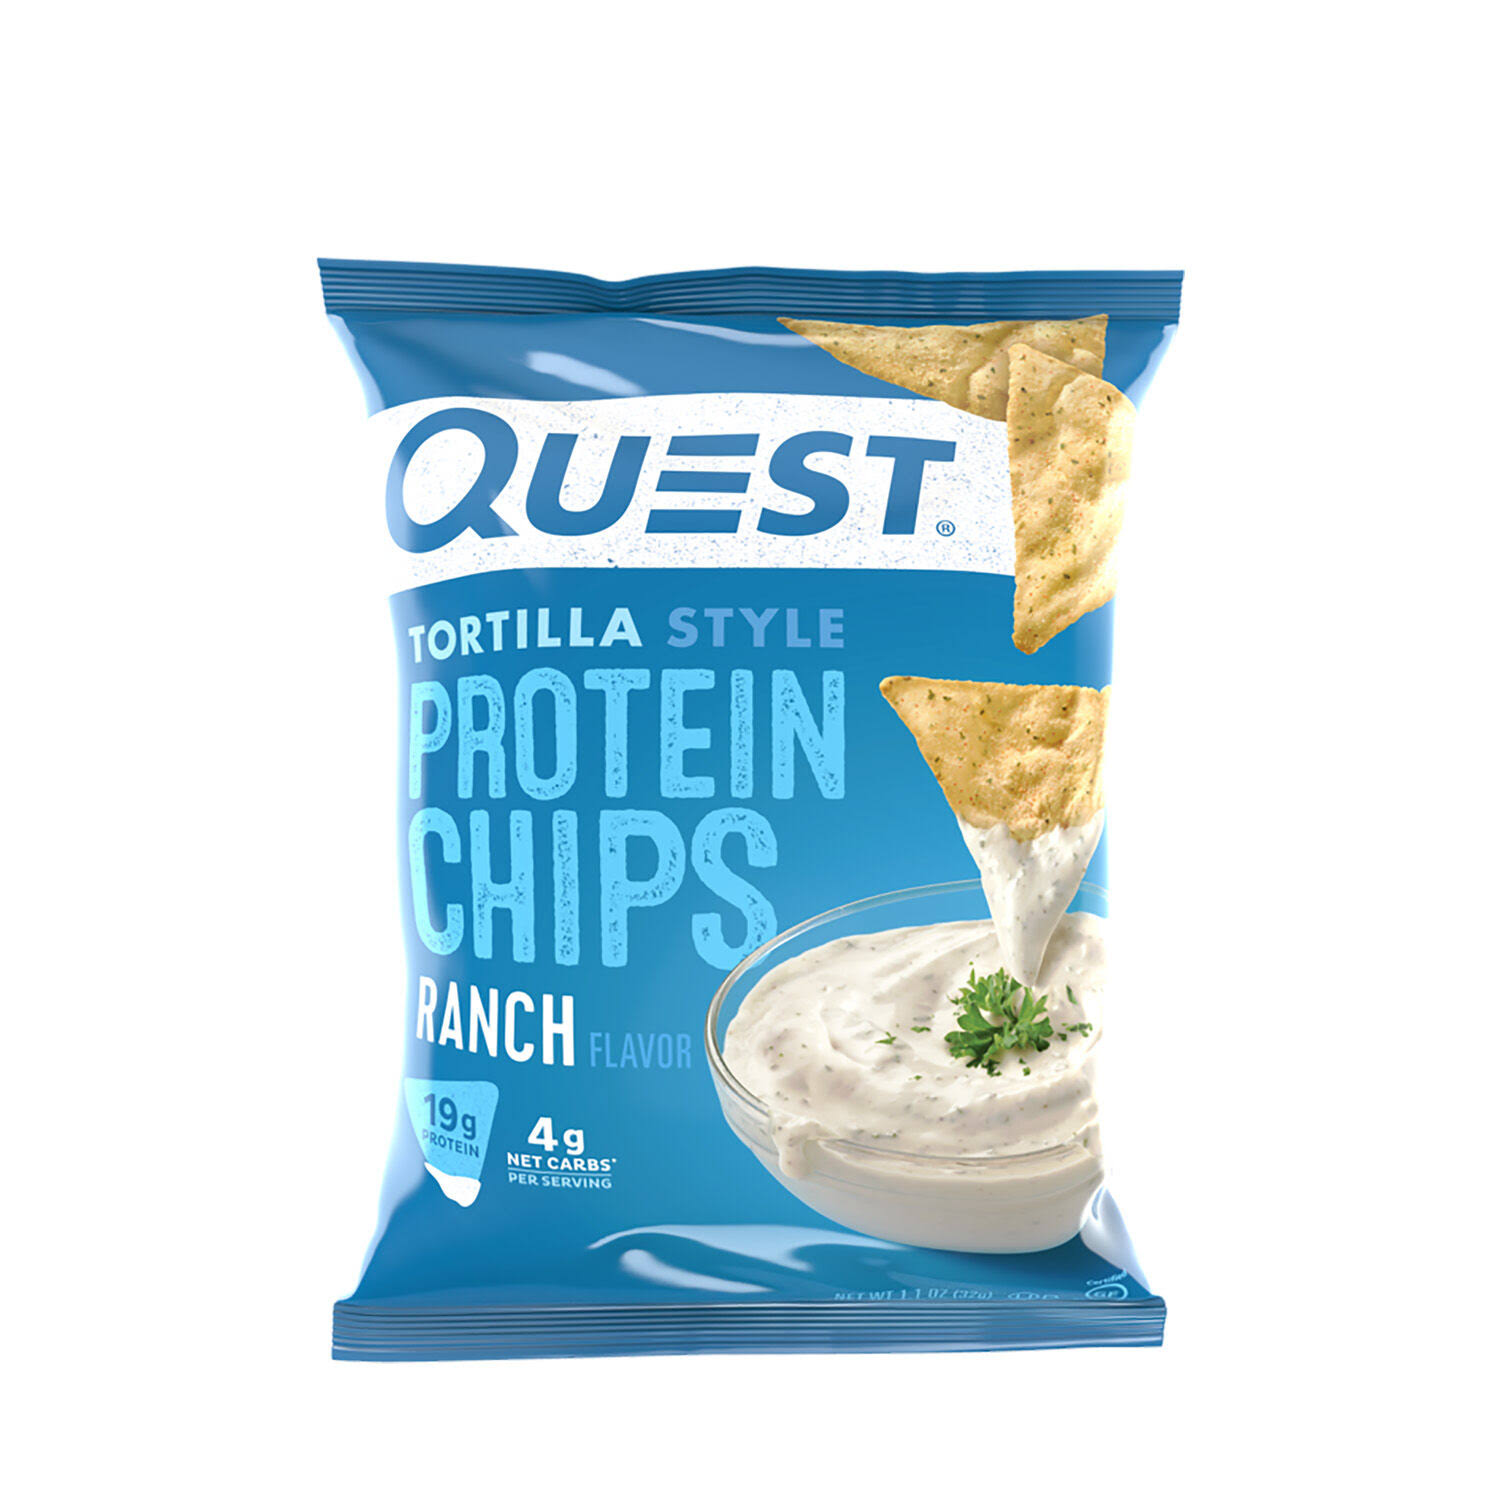 Quest Tortilla Style Protein Chips - Ranch, 8g | GNC